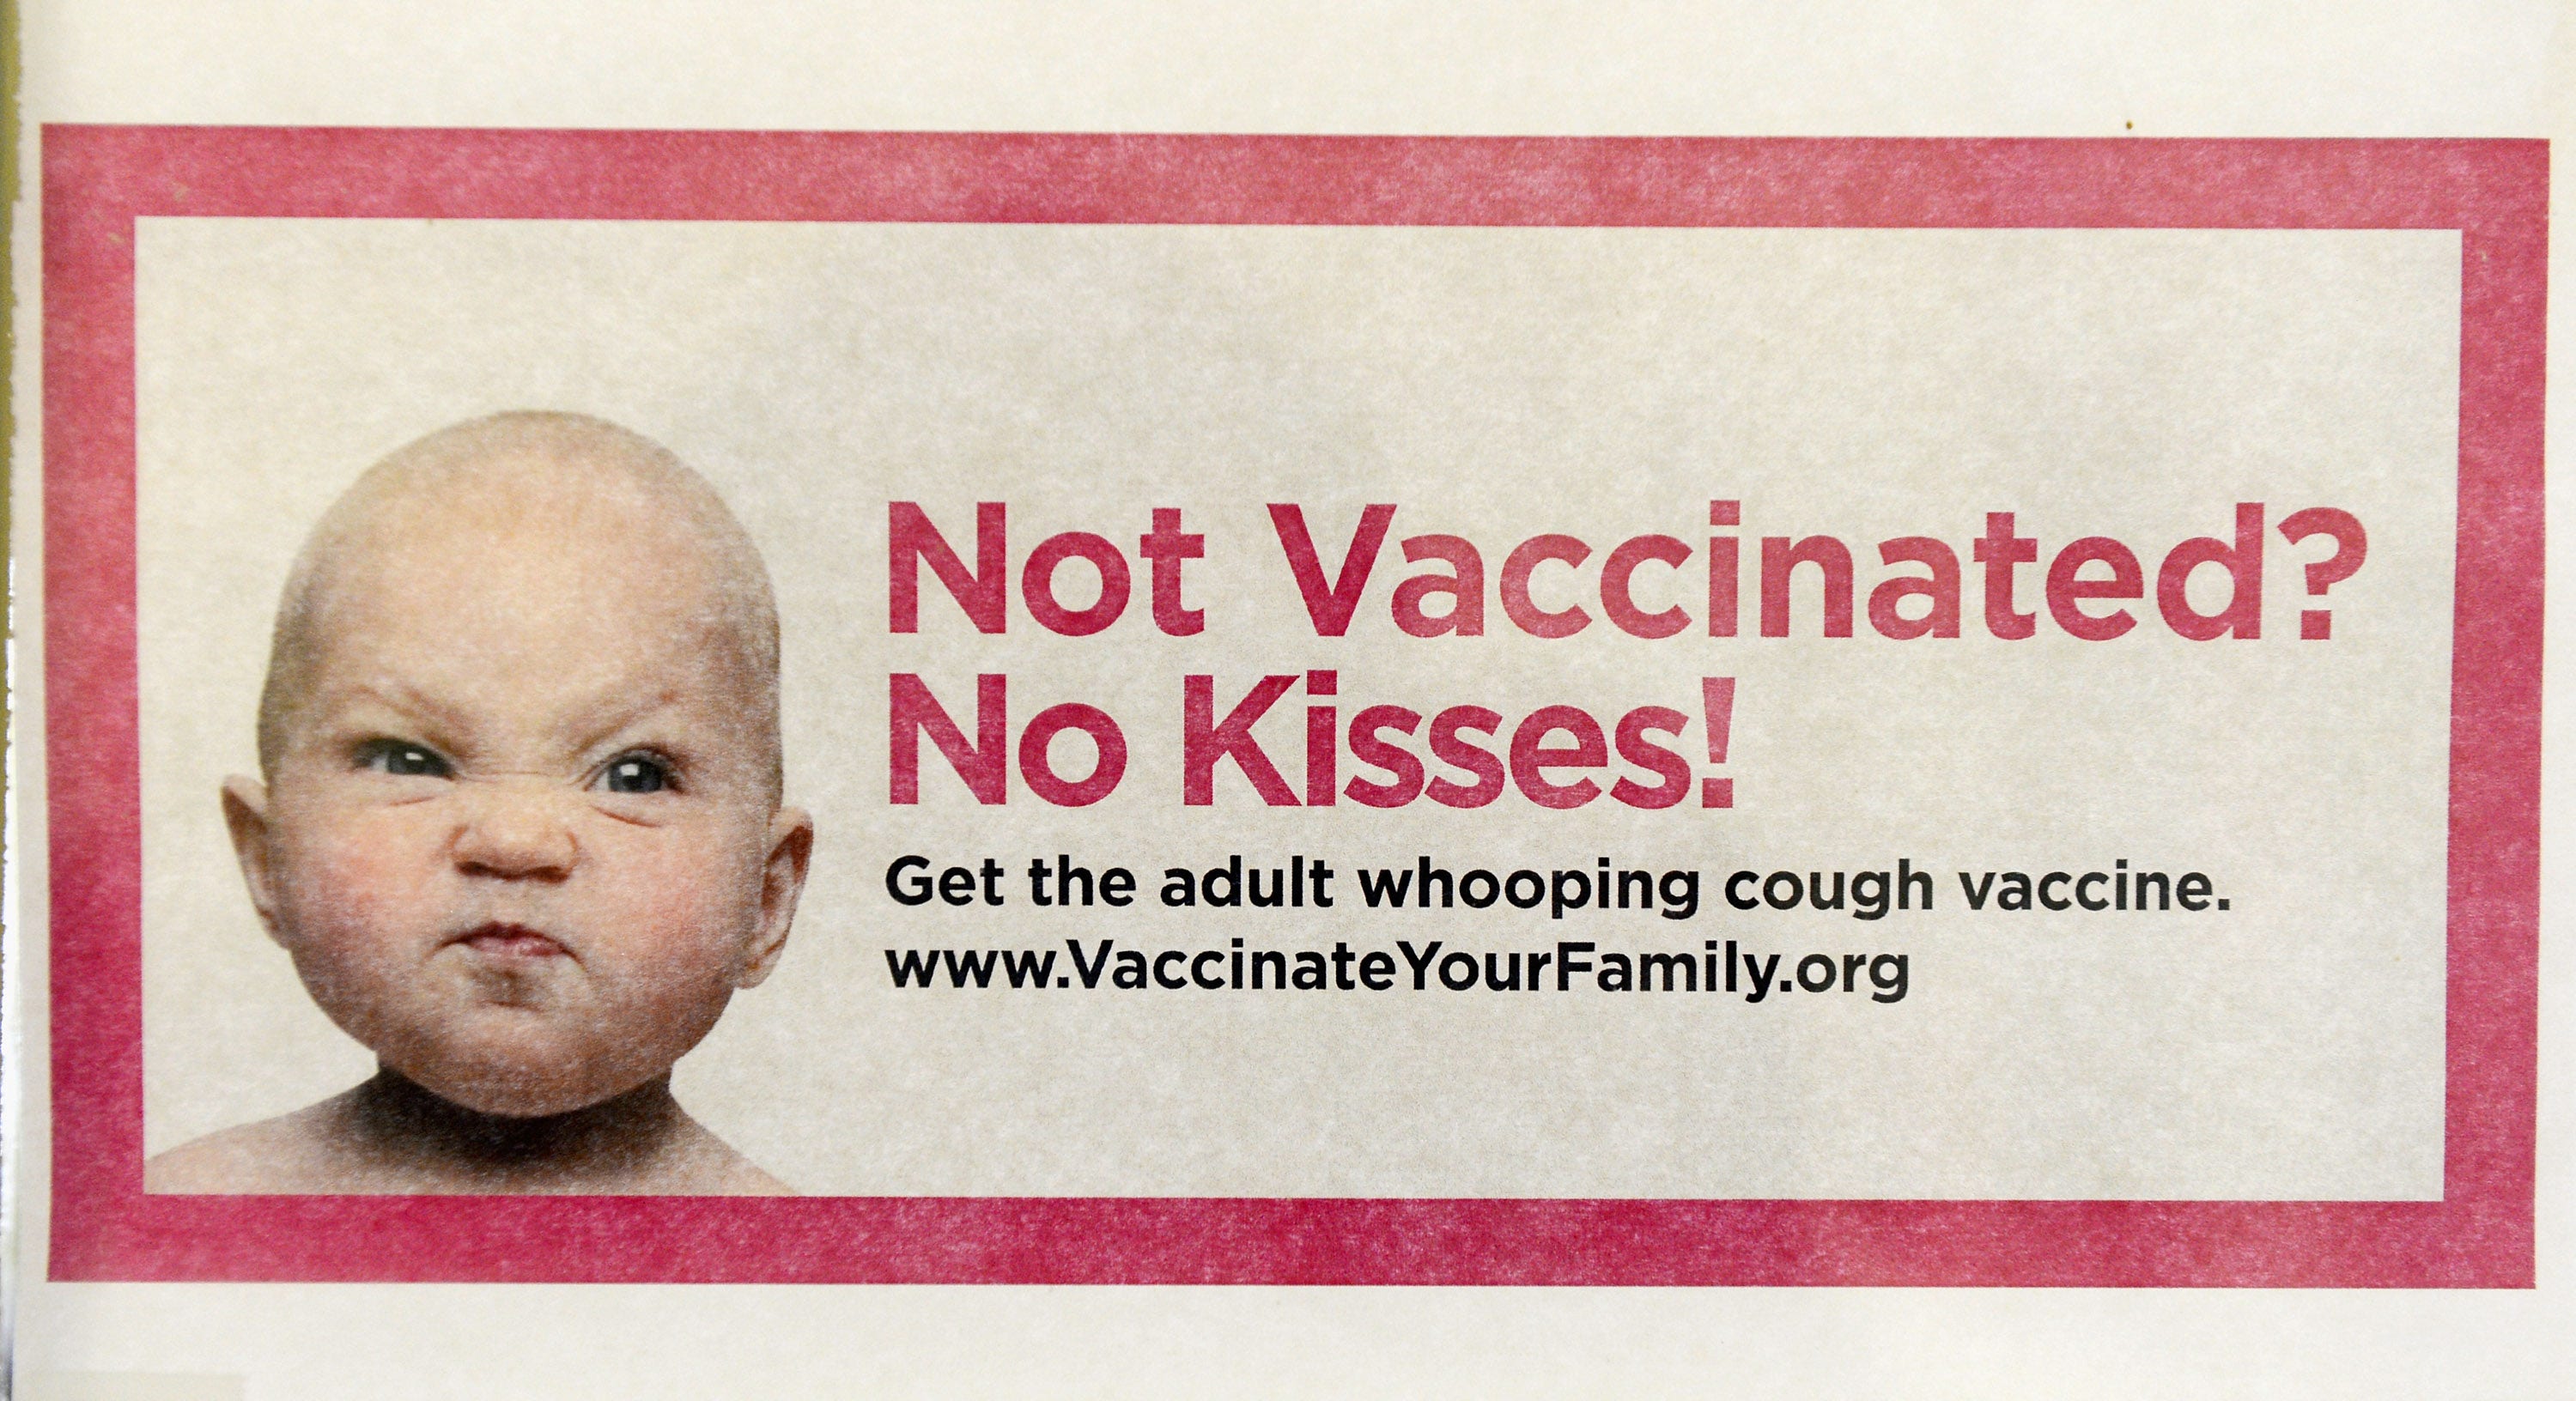 Whooping Cough Epidemic Strikes California 800 Cases In Past Two Weeks